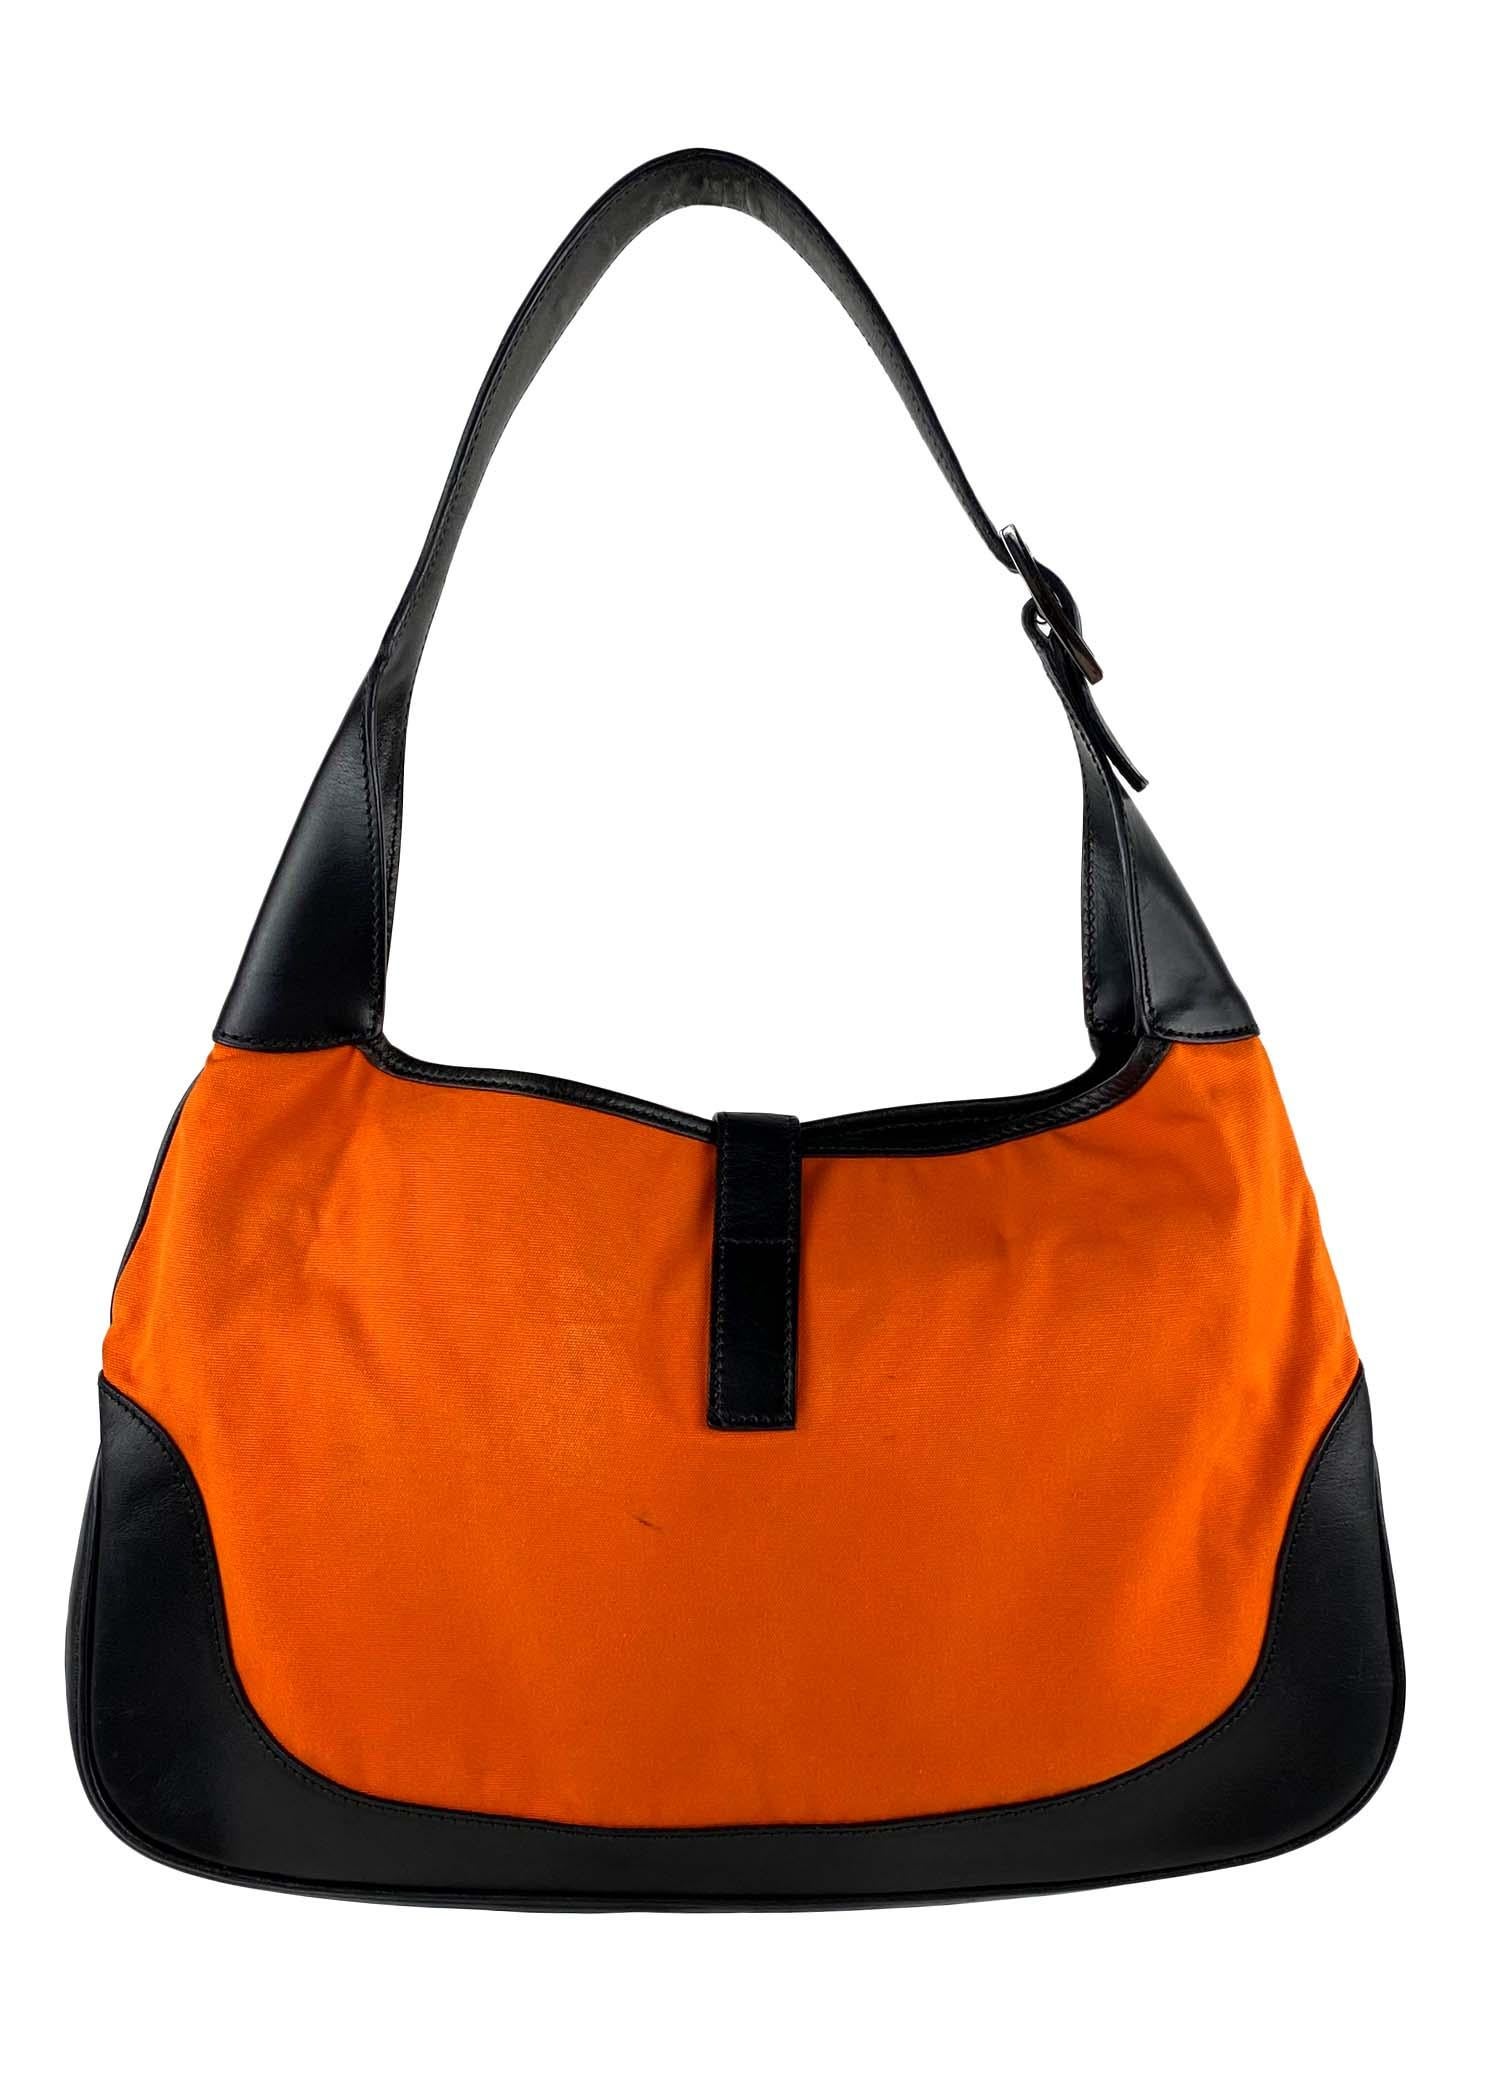 S/S 1999 Gucci by Tom Ford Orange Nylon Large Jackie Bag at 1stDibs